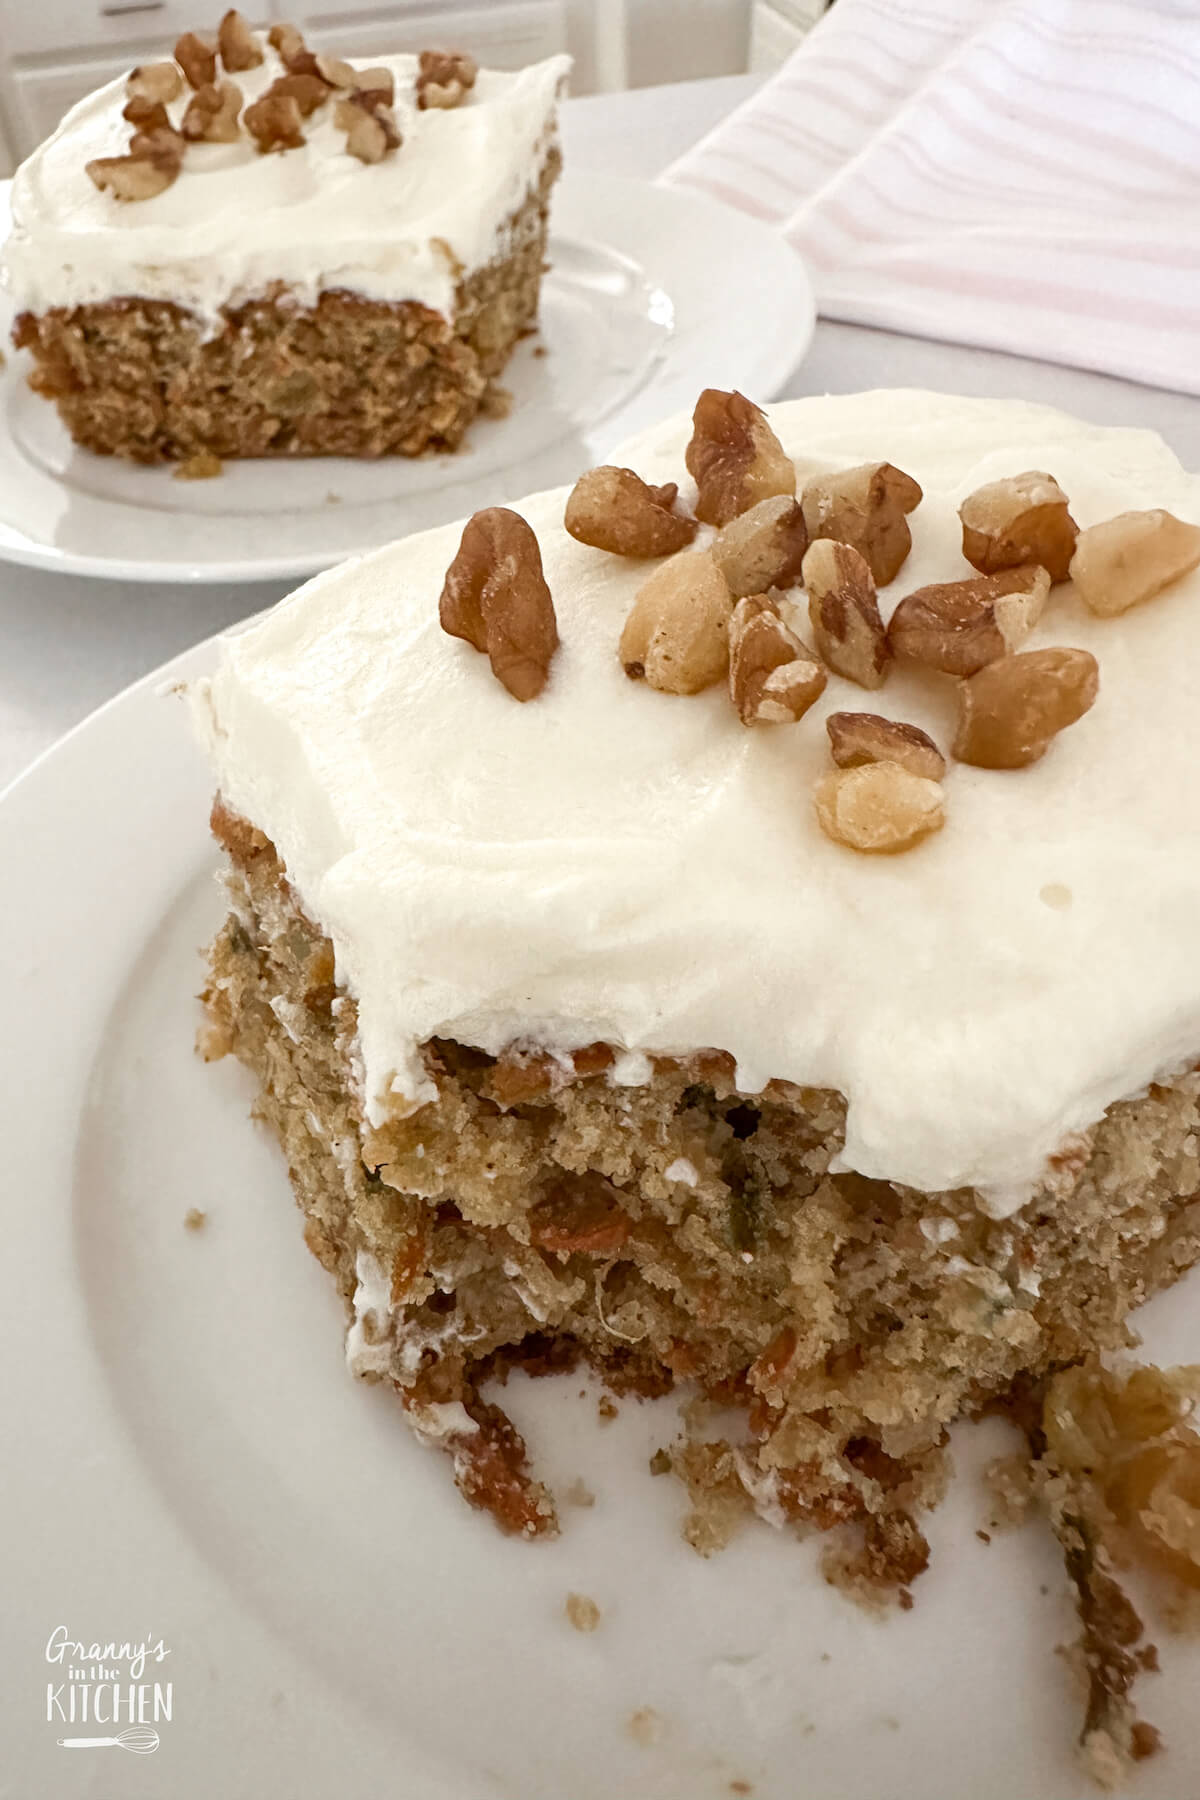 top down view of two plated pieces of carrot cake, one with a bite missing